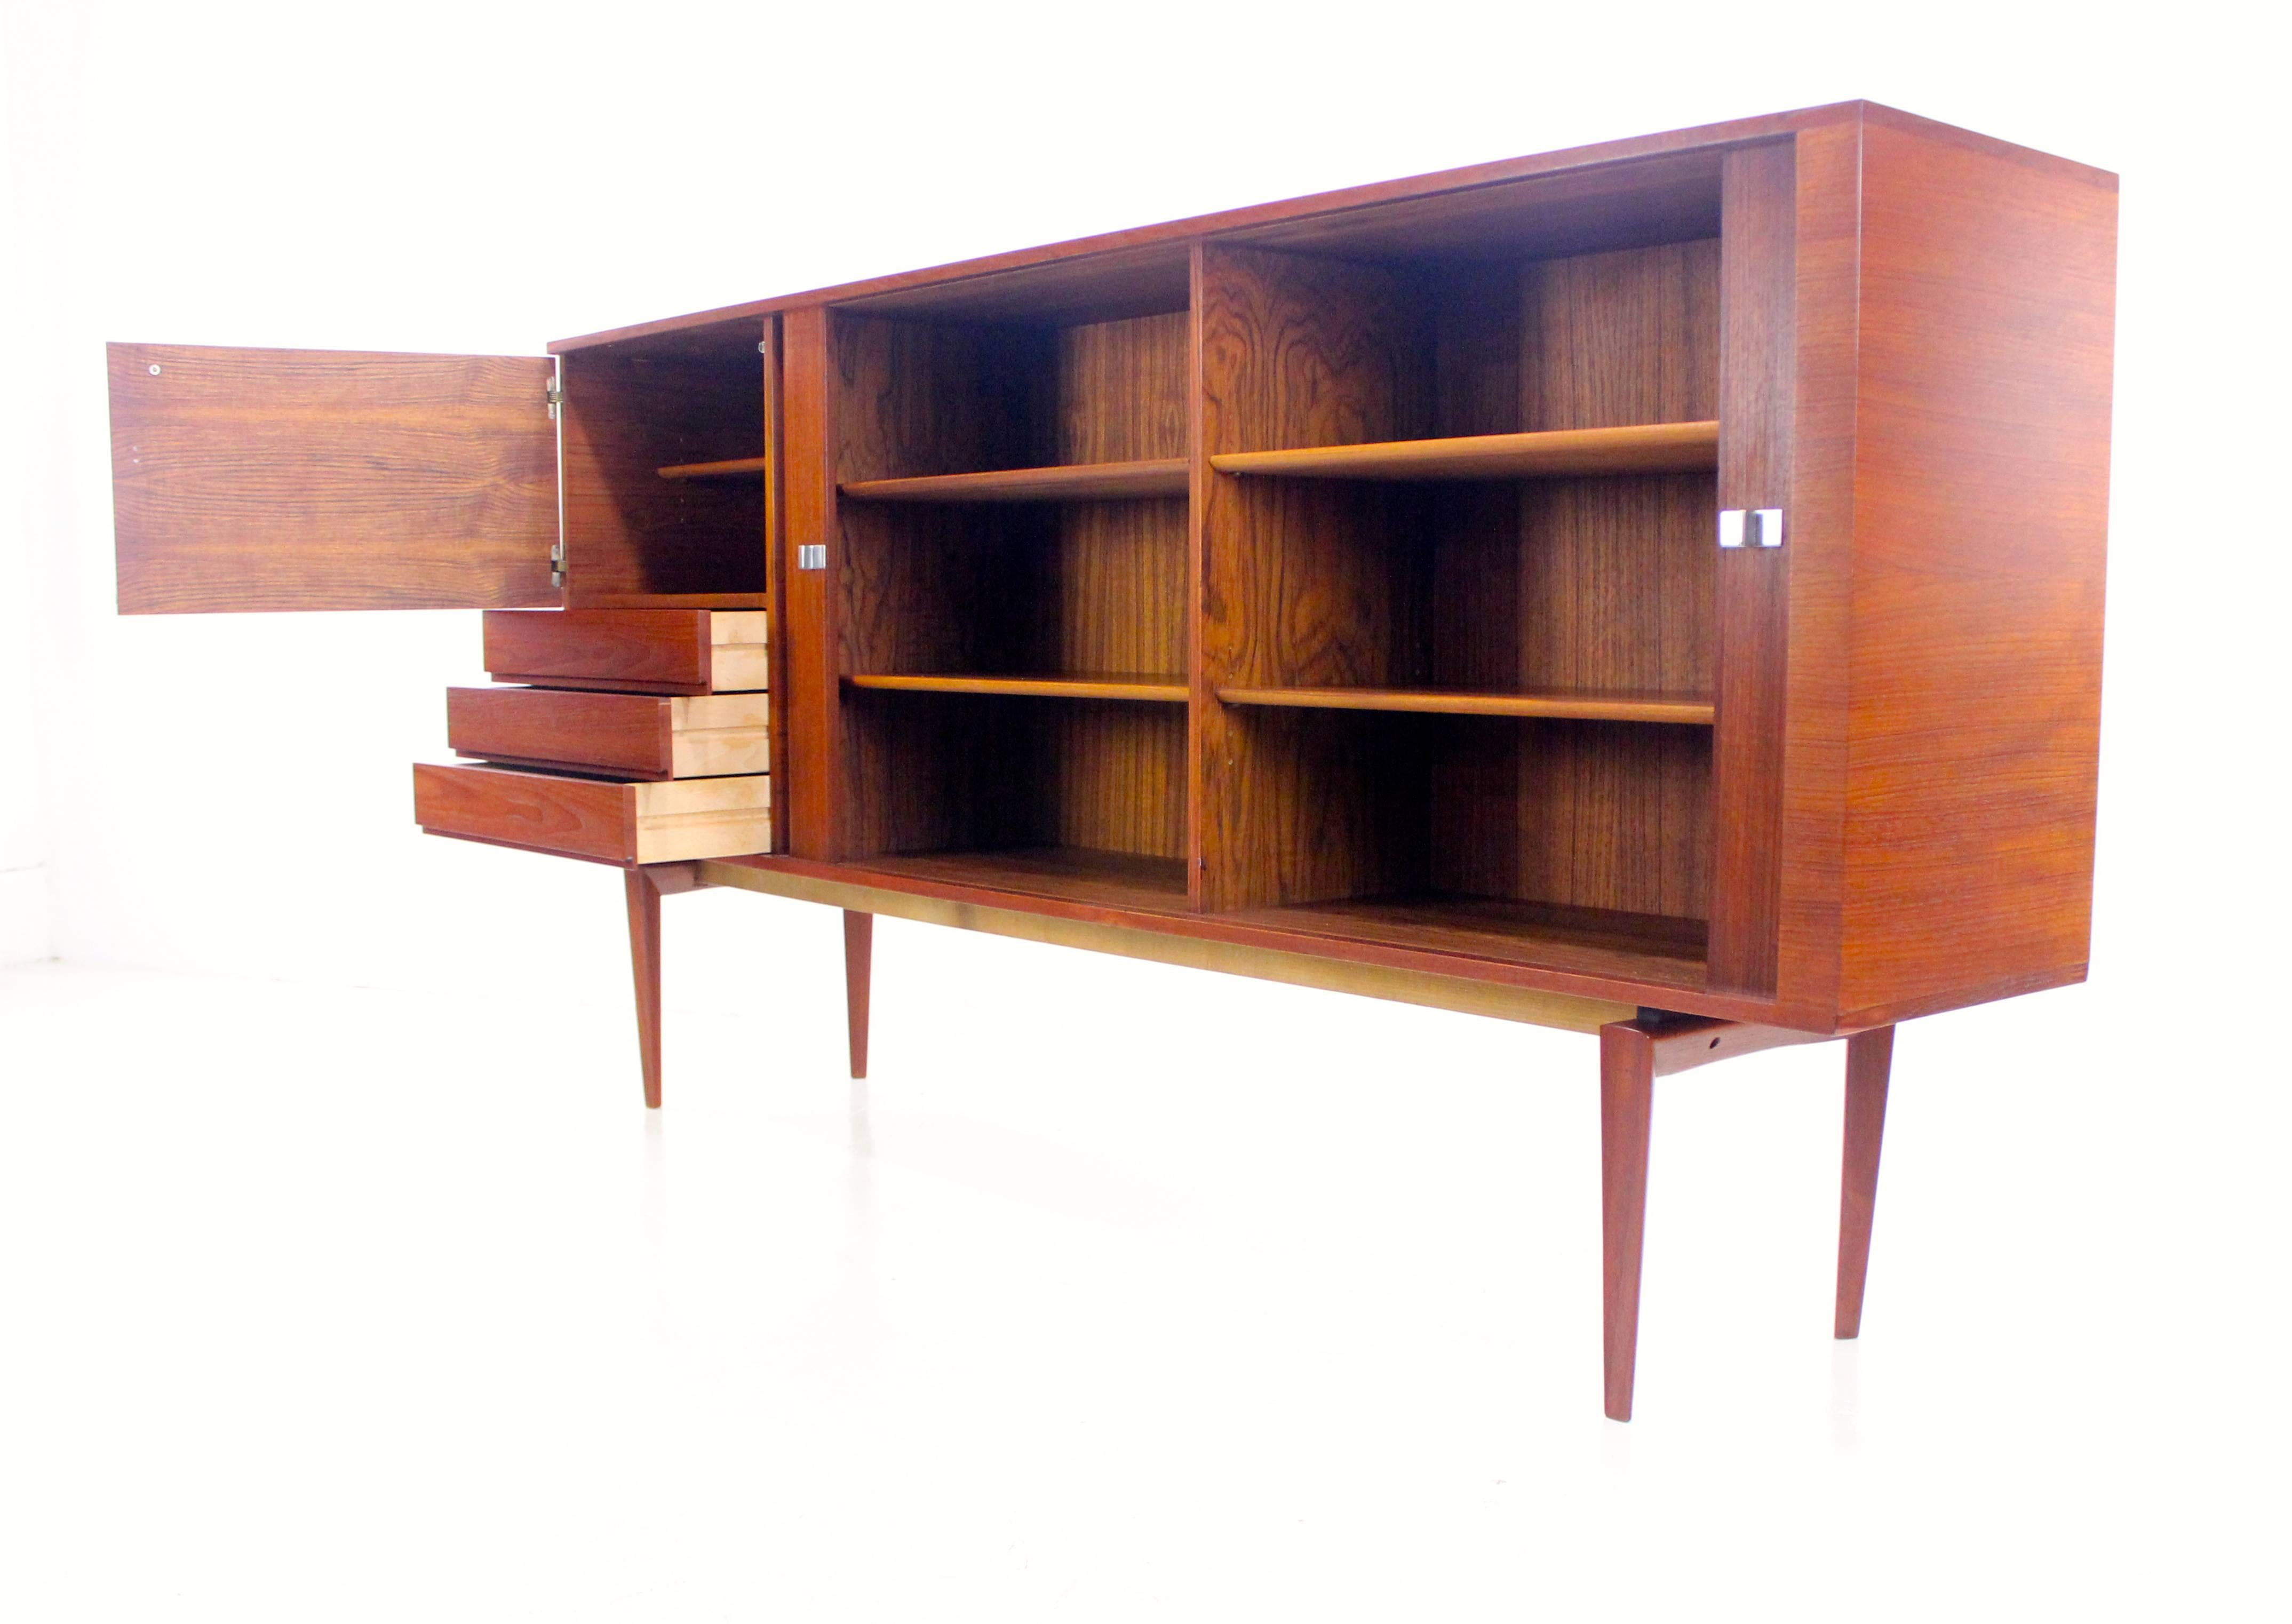 Distinctive Danish Modern Teak Credenza or Sideboard Designed by H.W. Klein In Excellent Condition For Sale In Portland, OR